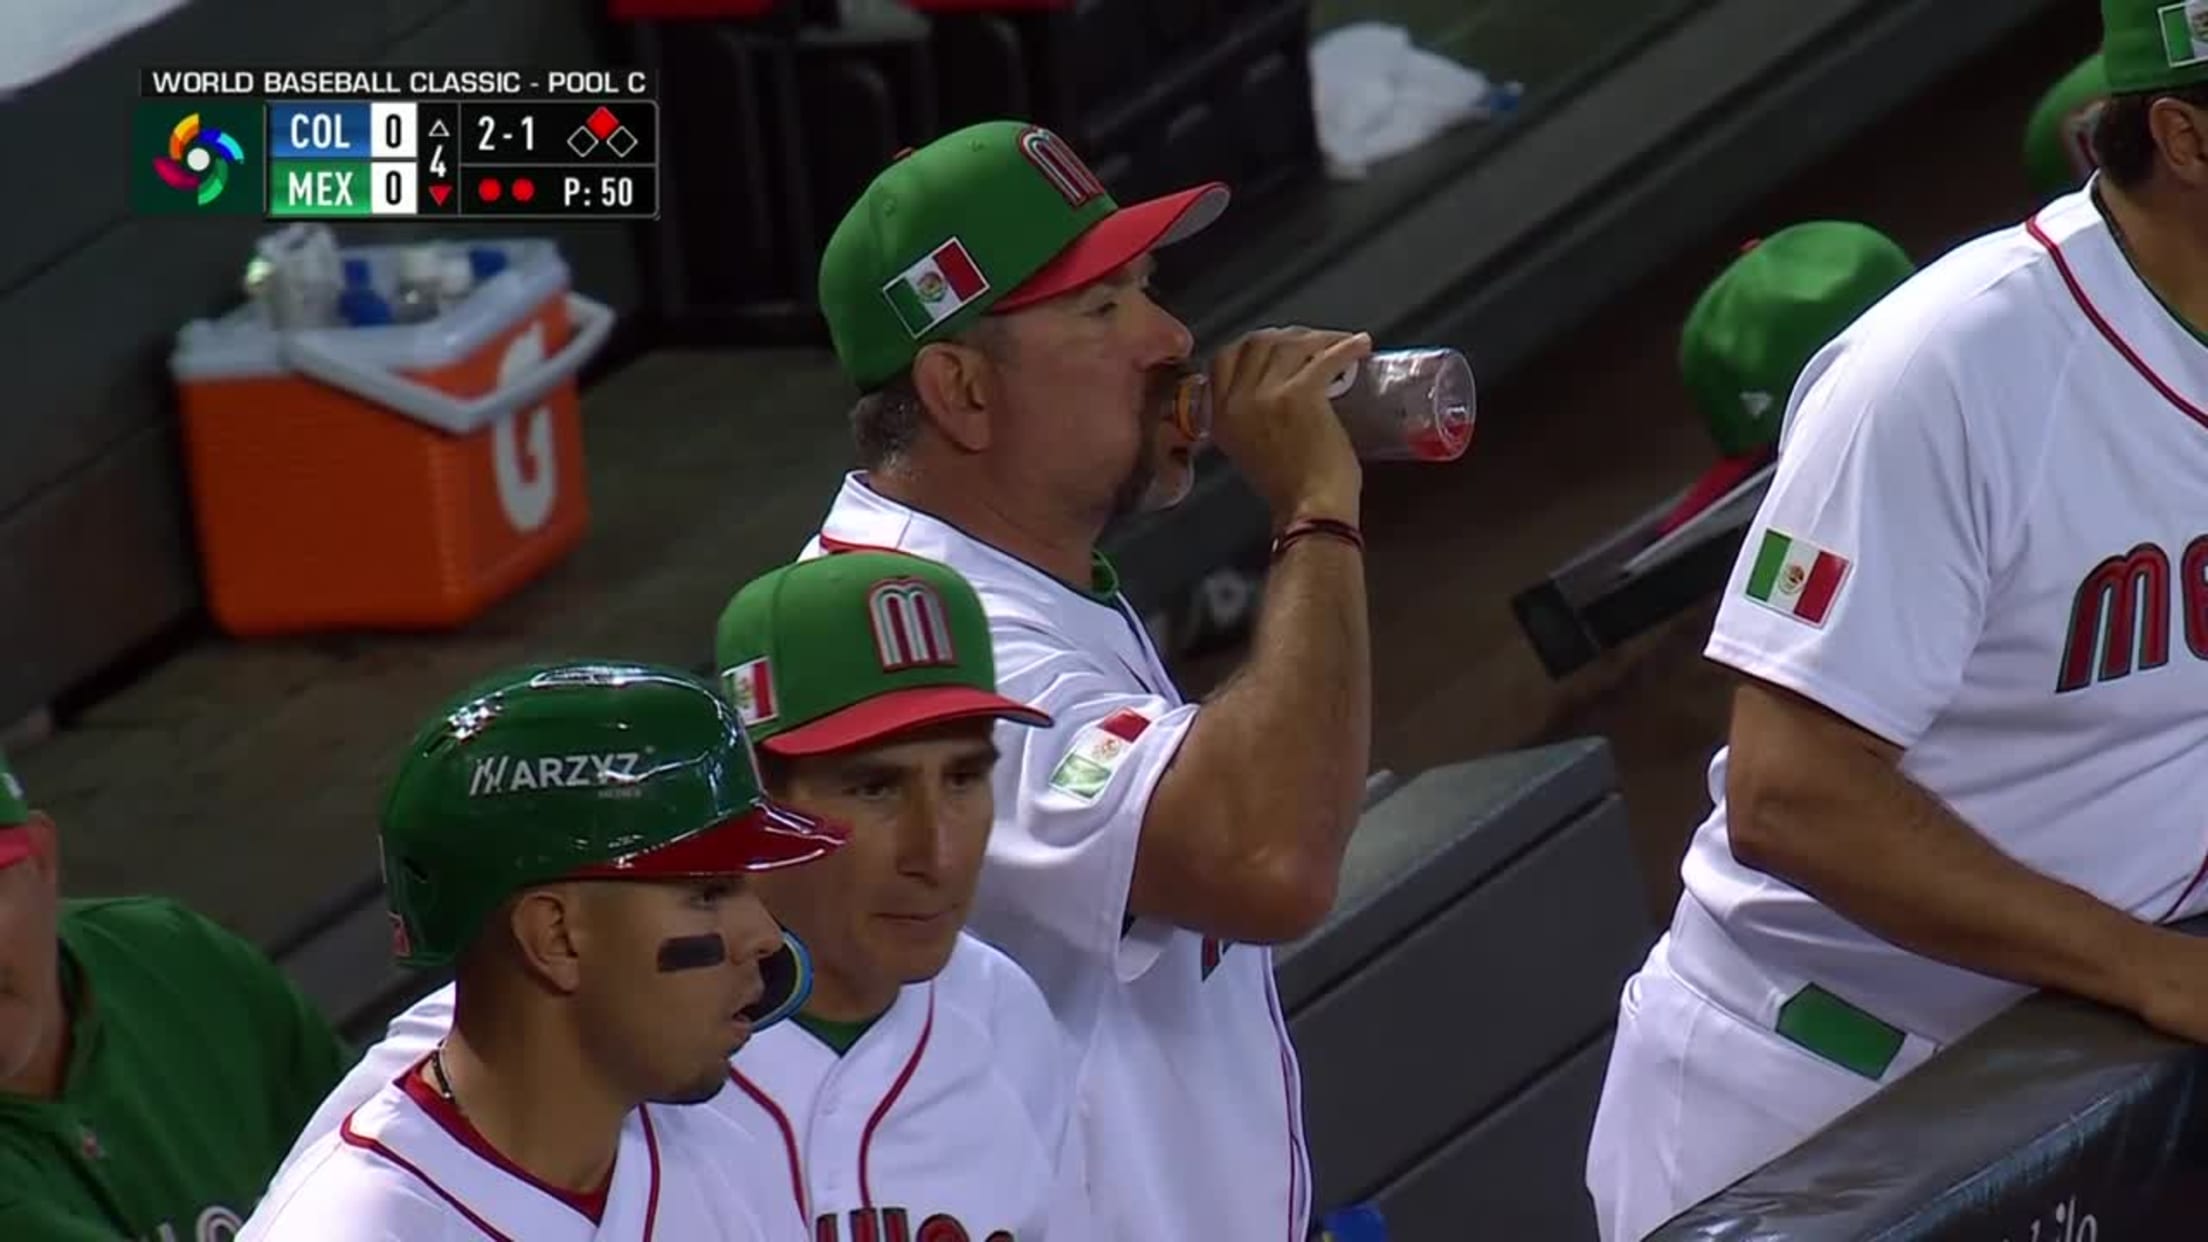 Isaac Paredes hits one 412 feet to put Mexico on the board : r/baseball